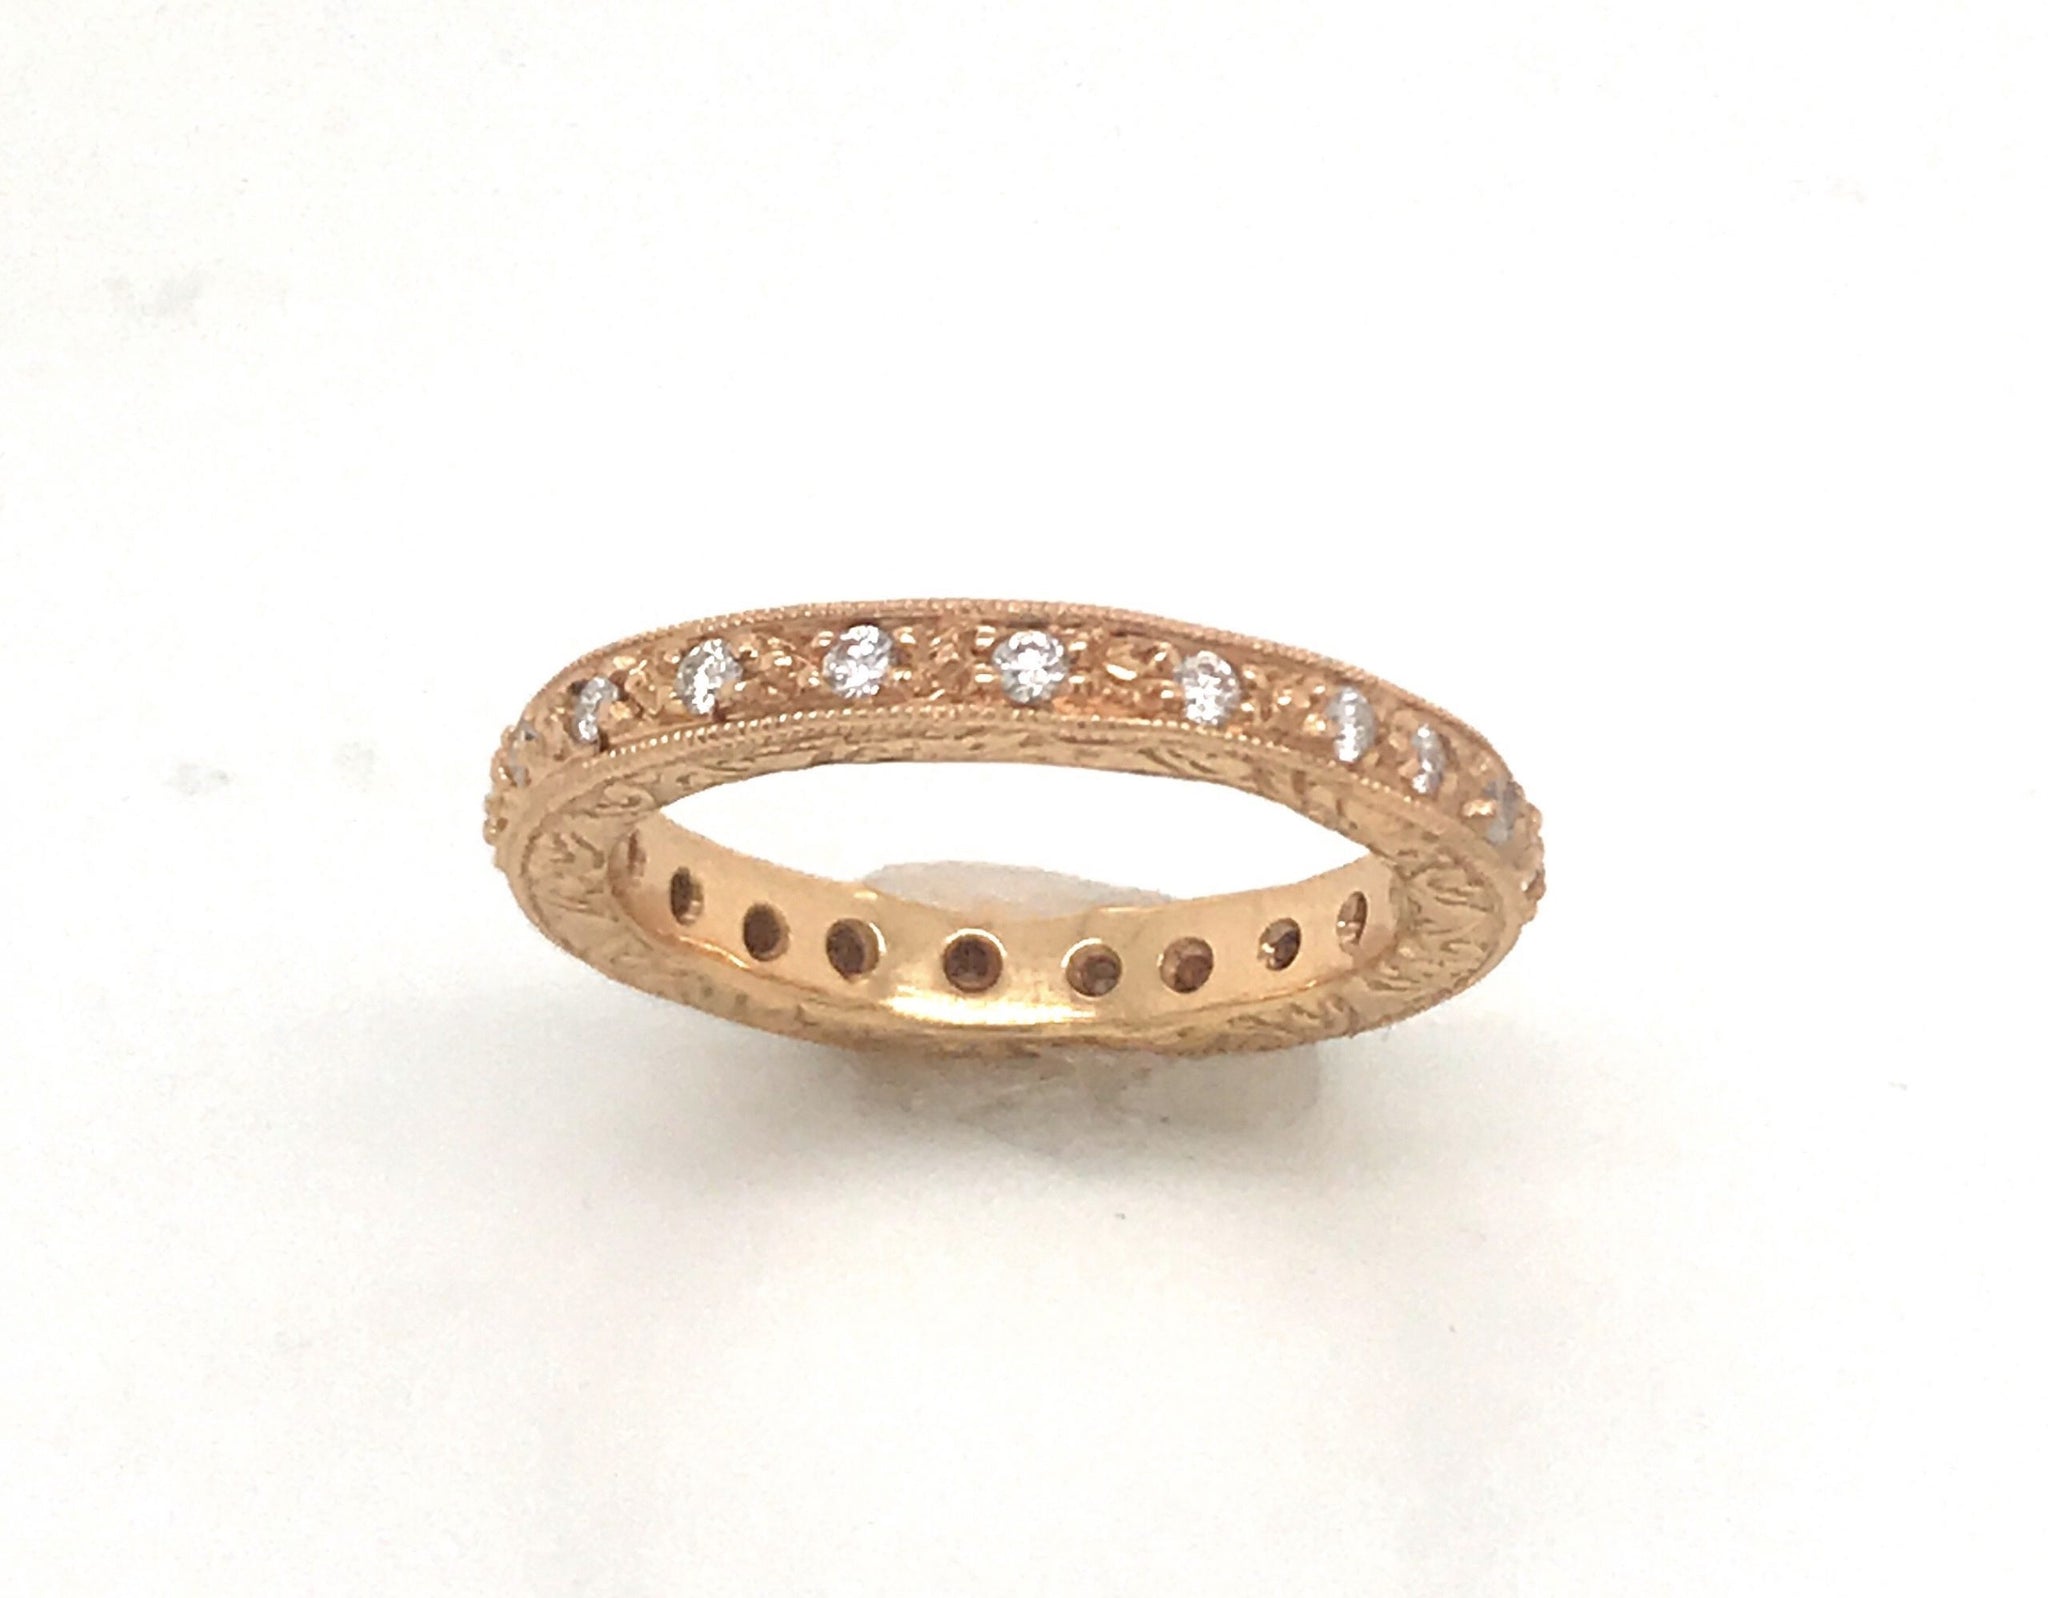 Variation test of 18kt white gold Pave' Linear Thin Eternity Band